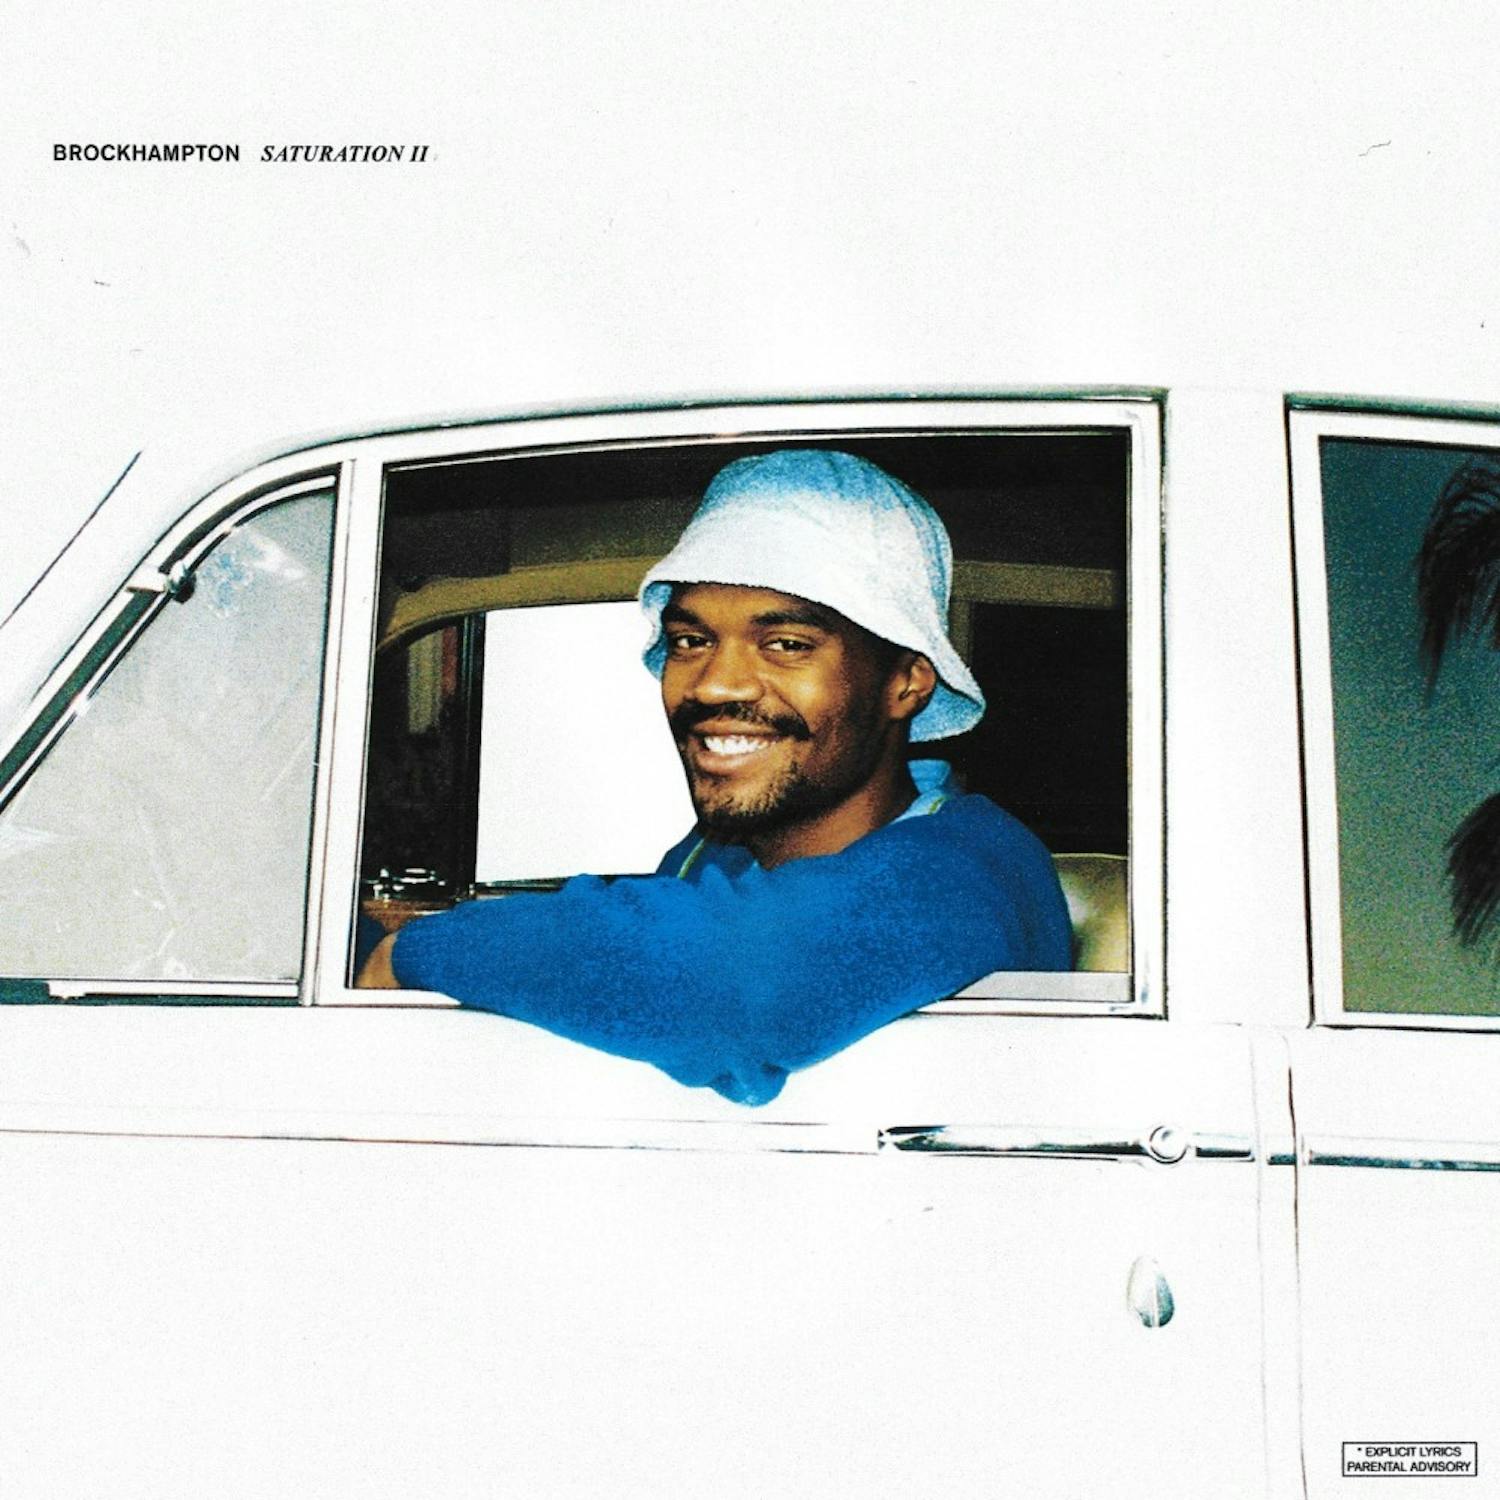 BROCKHAMPTON released "Saturation 2" on Friday.&nbsp;Honest lyricism, witty wordplay and memorable production creates an album filled with a youthful and inviting atmosphere for fans.